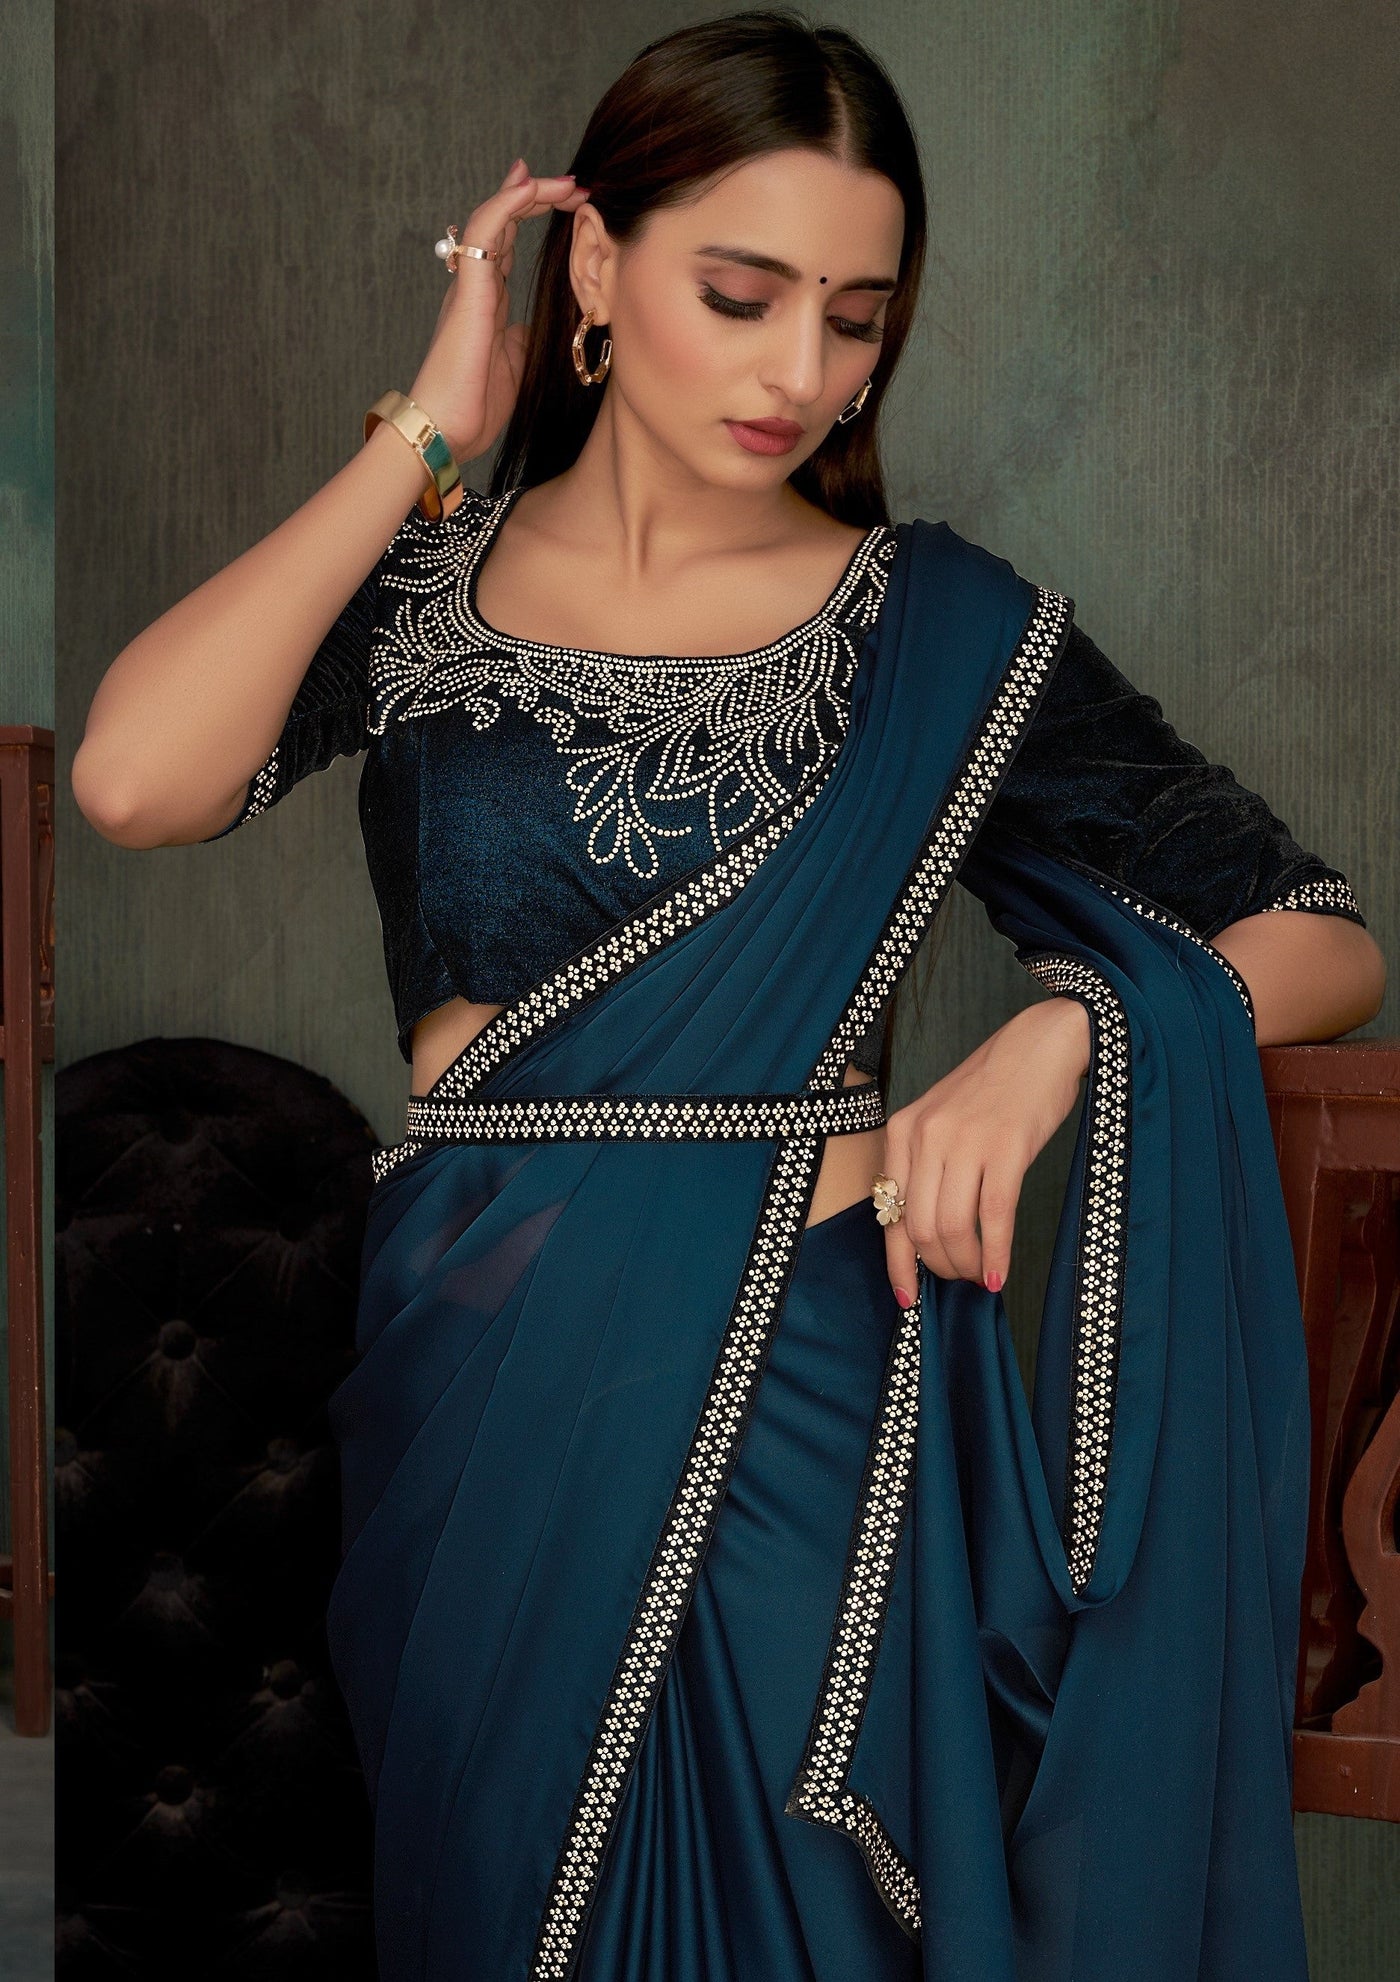 Blue Georgette Stone Work Saree With Blouse